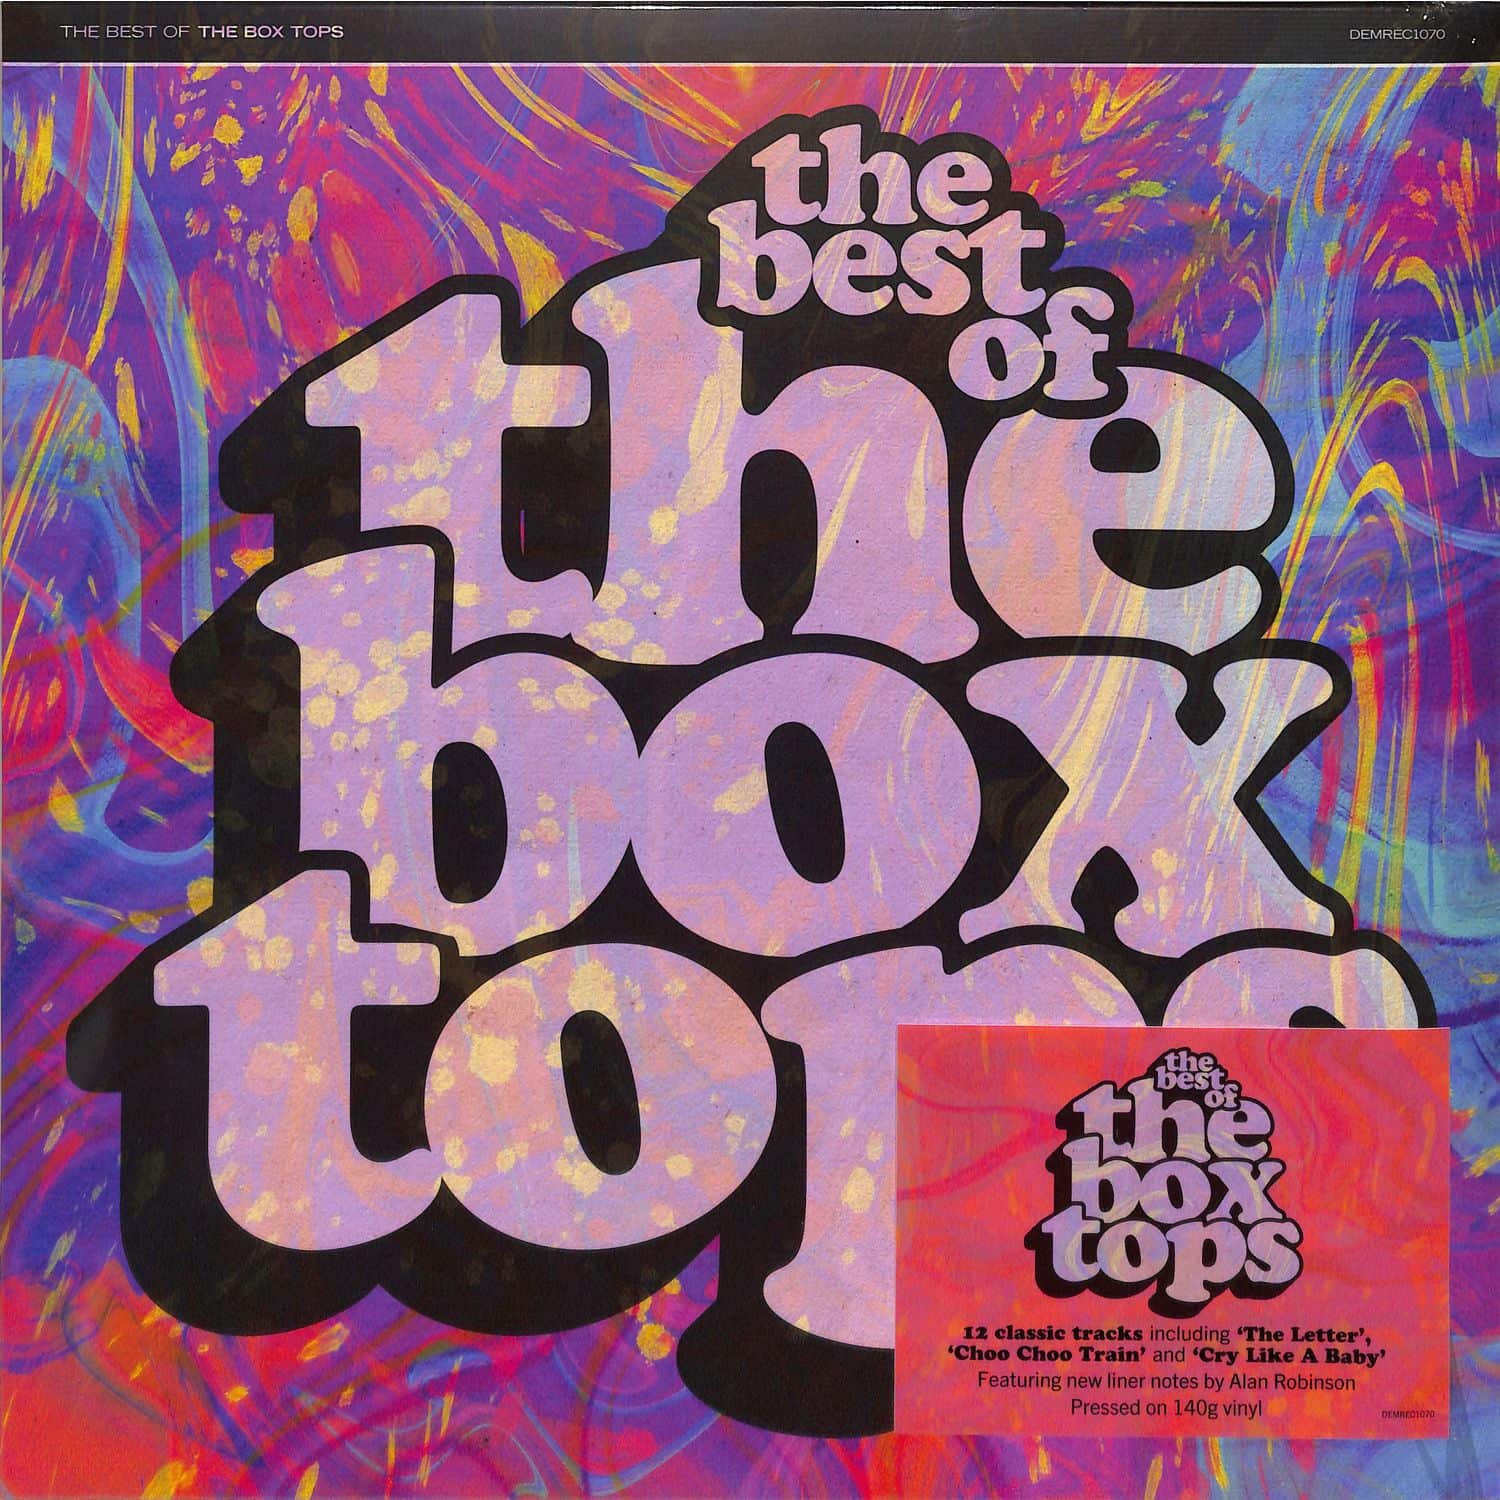 The Box Tops - THE BEST OF THE BOX TOPS 